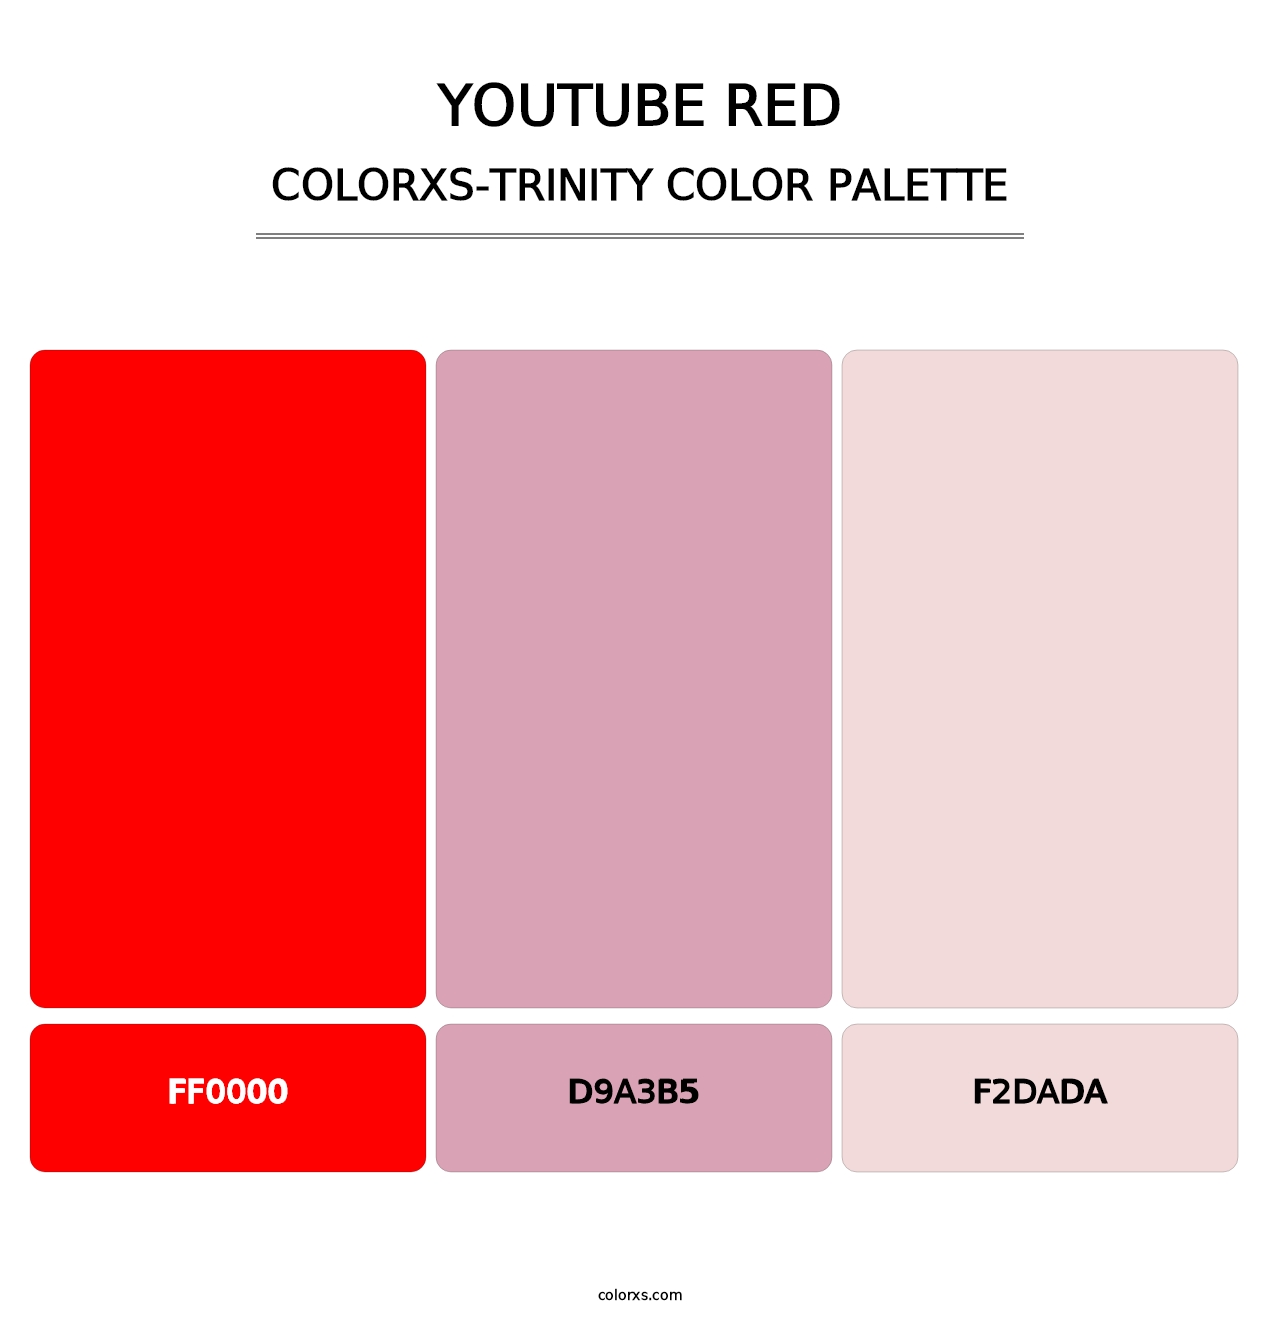 YouTube Red - Colorxs Trinity Palette